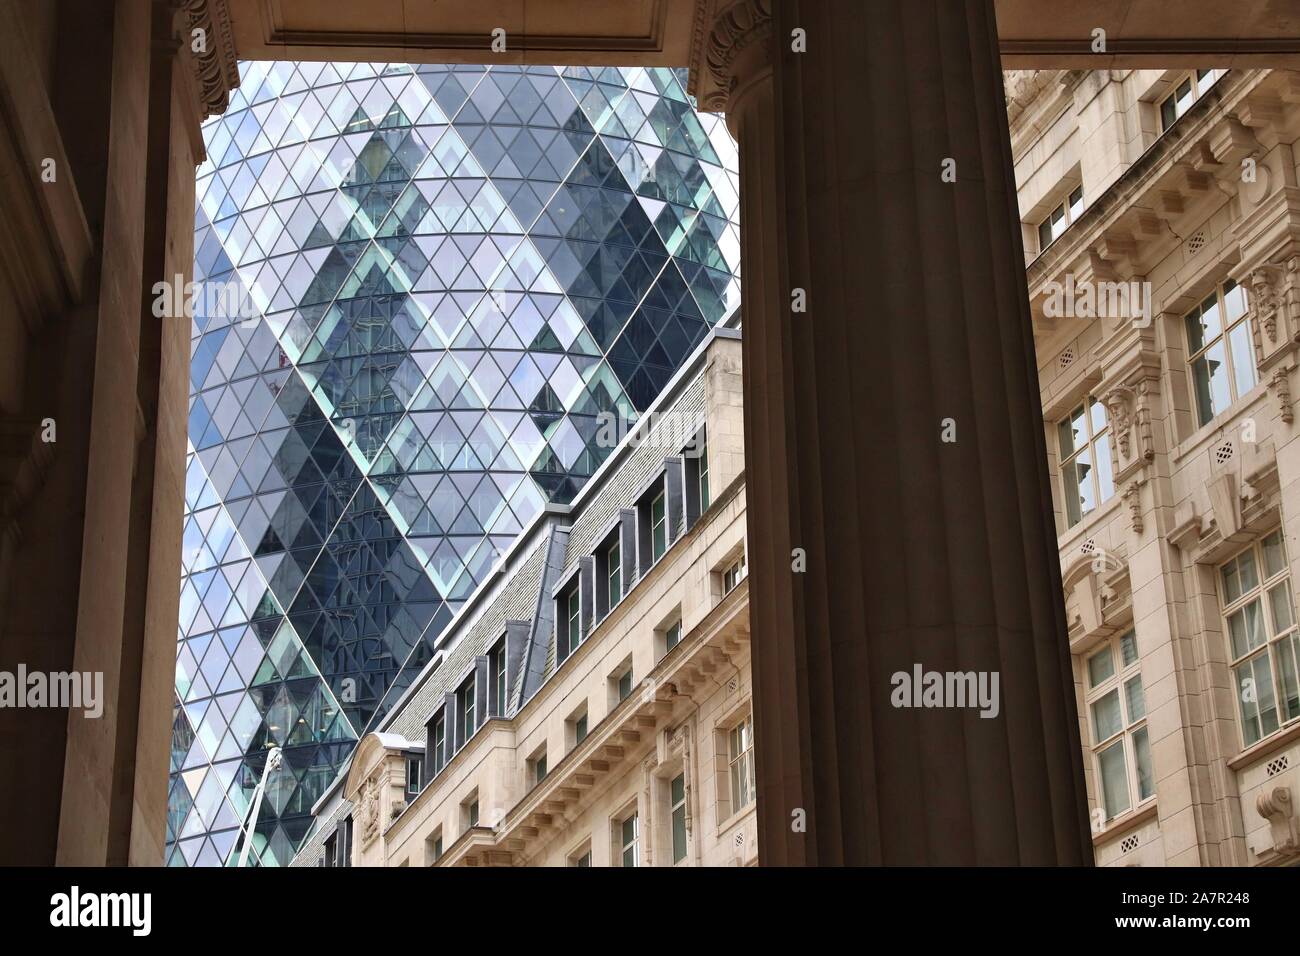 LONDON, UK - JULY 13, 2019: 30 St Mary Axe building in London. It was built in 2003 by Skanska and is owned by Safra Group. Stock Photo